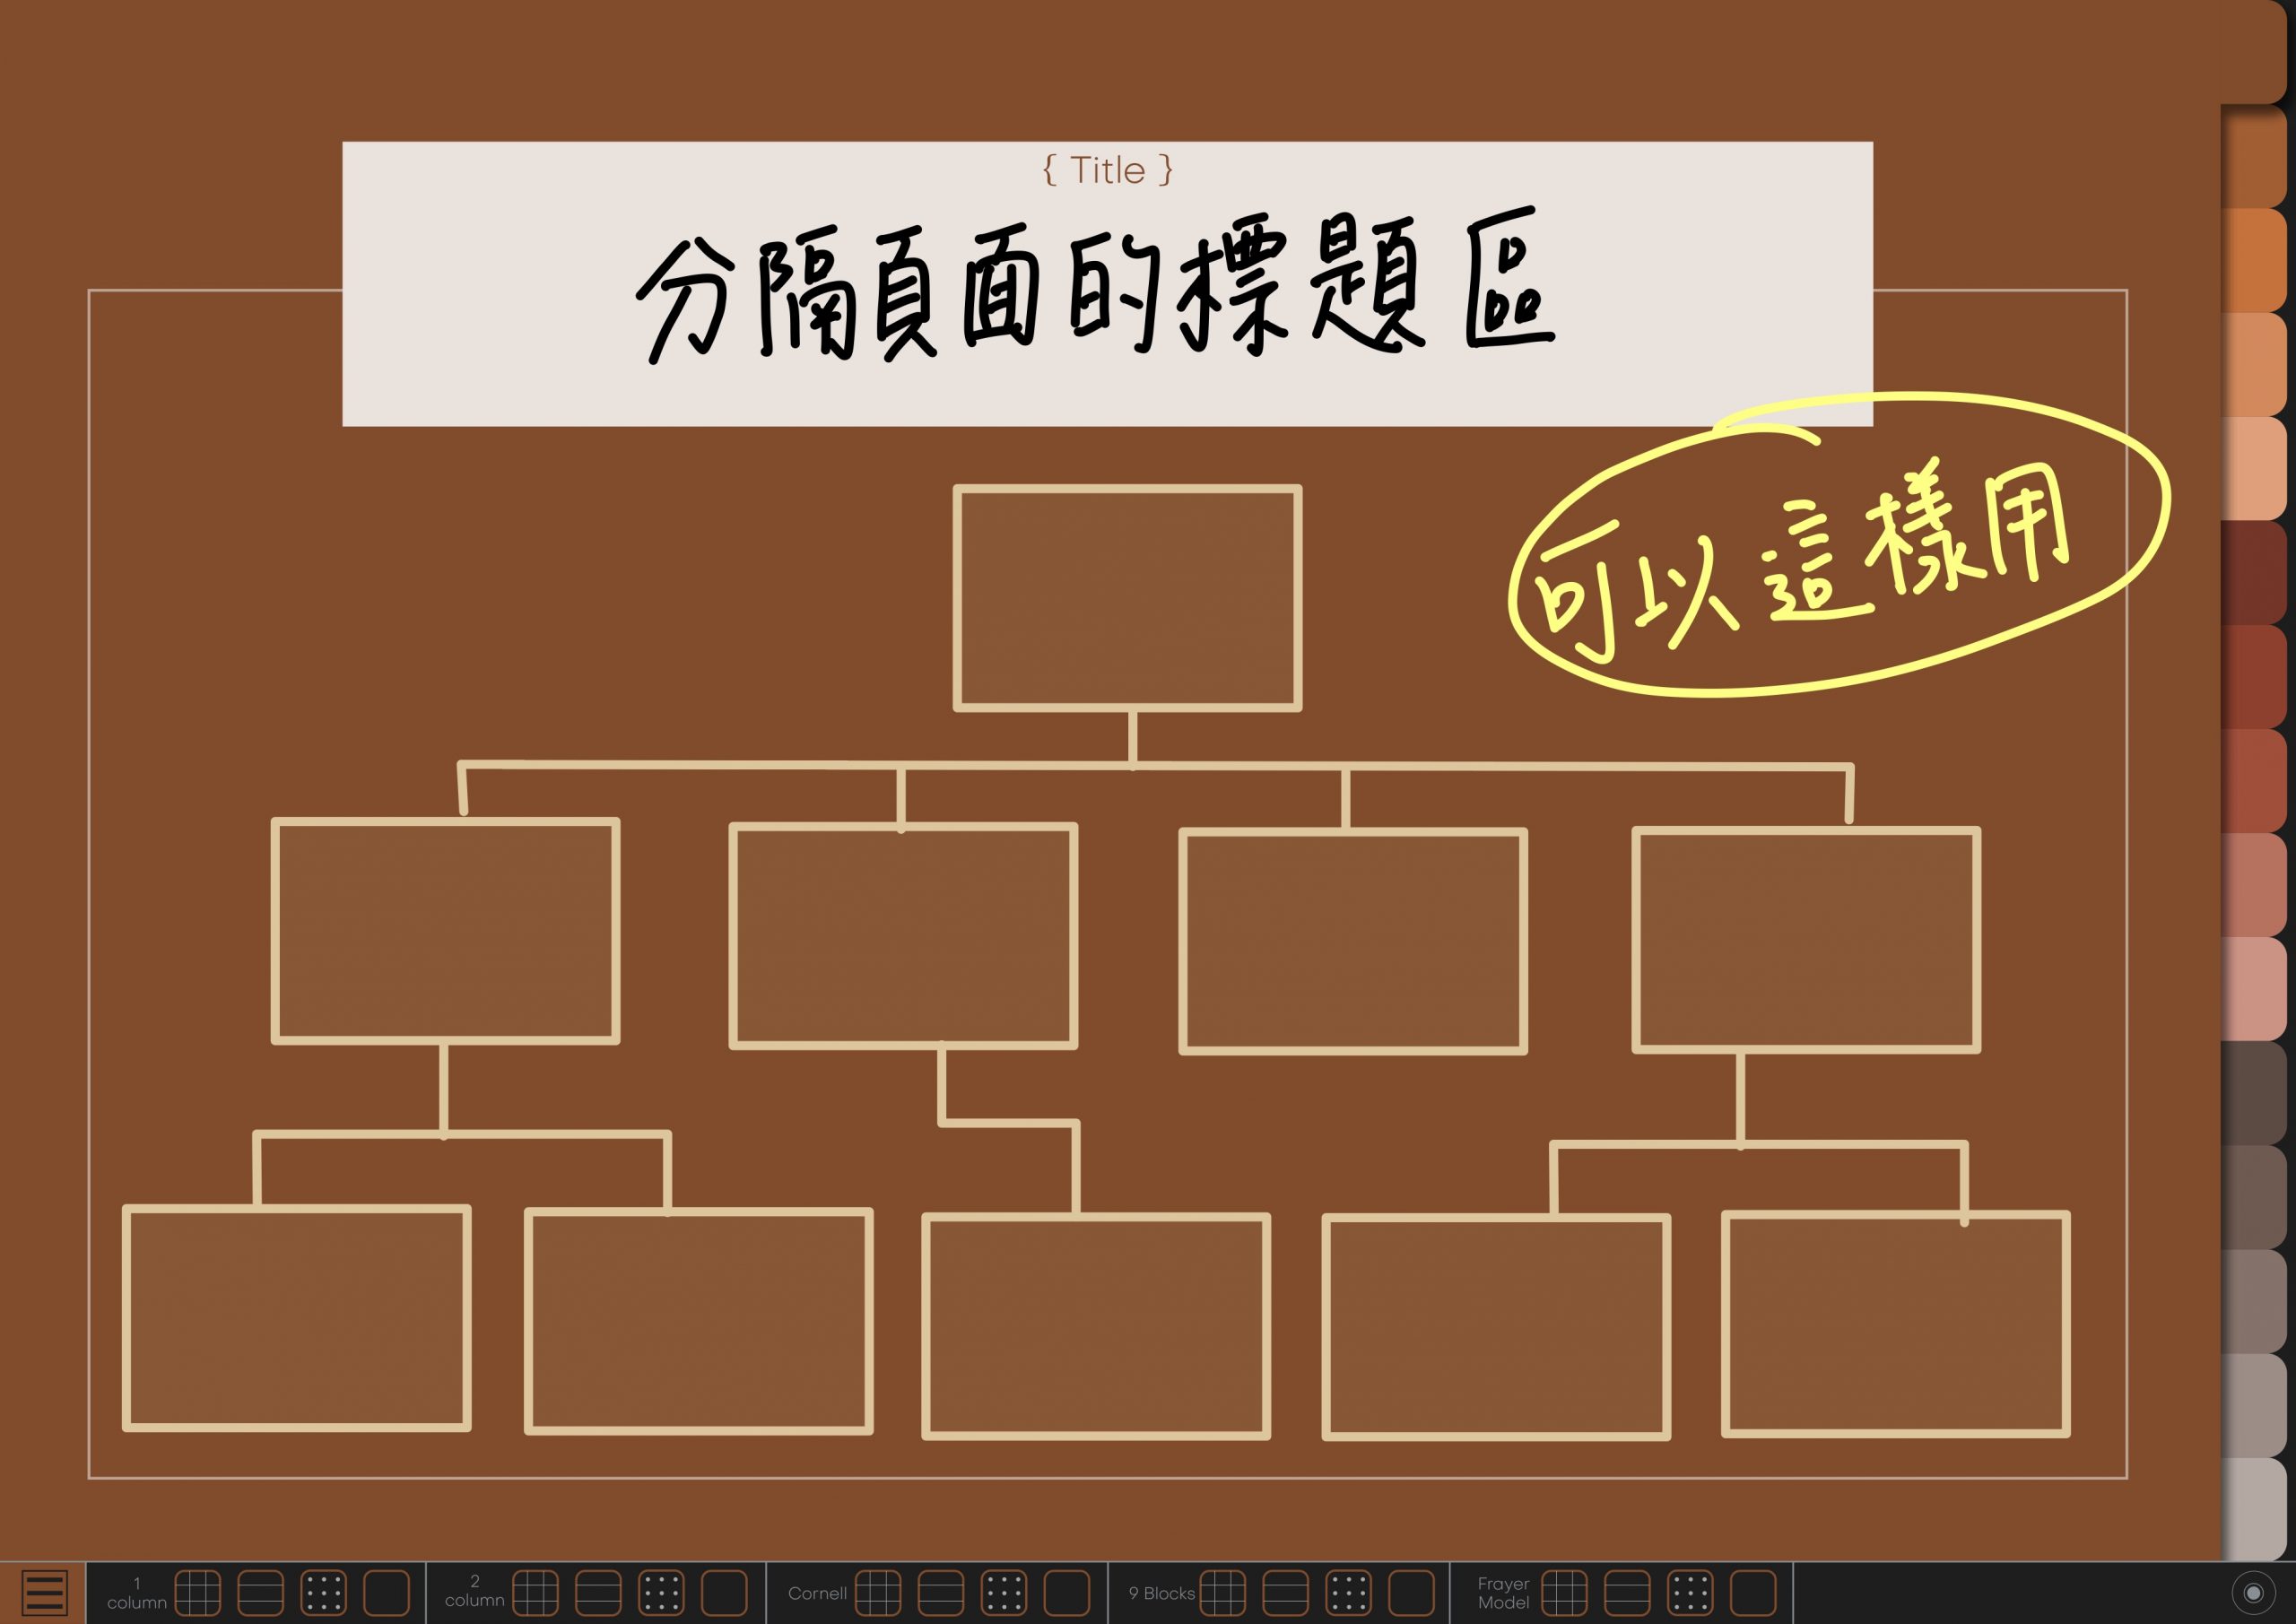 Notebook-Landscape-Solid Color Cover-15 Tabs-Toffee And Chocolate-Dark Mode 分隔頁使用參考1 | me.Learning